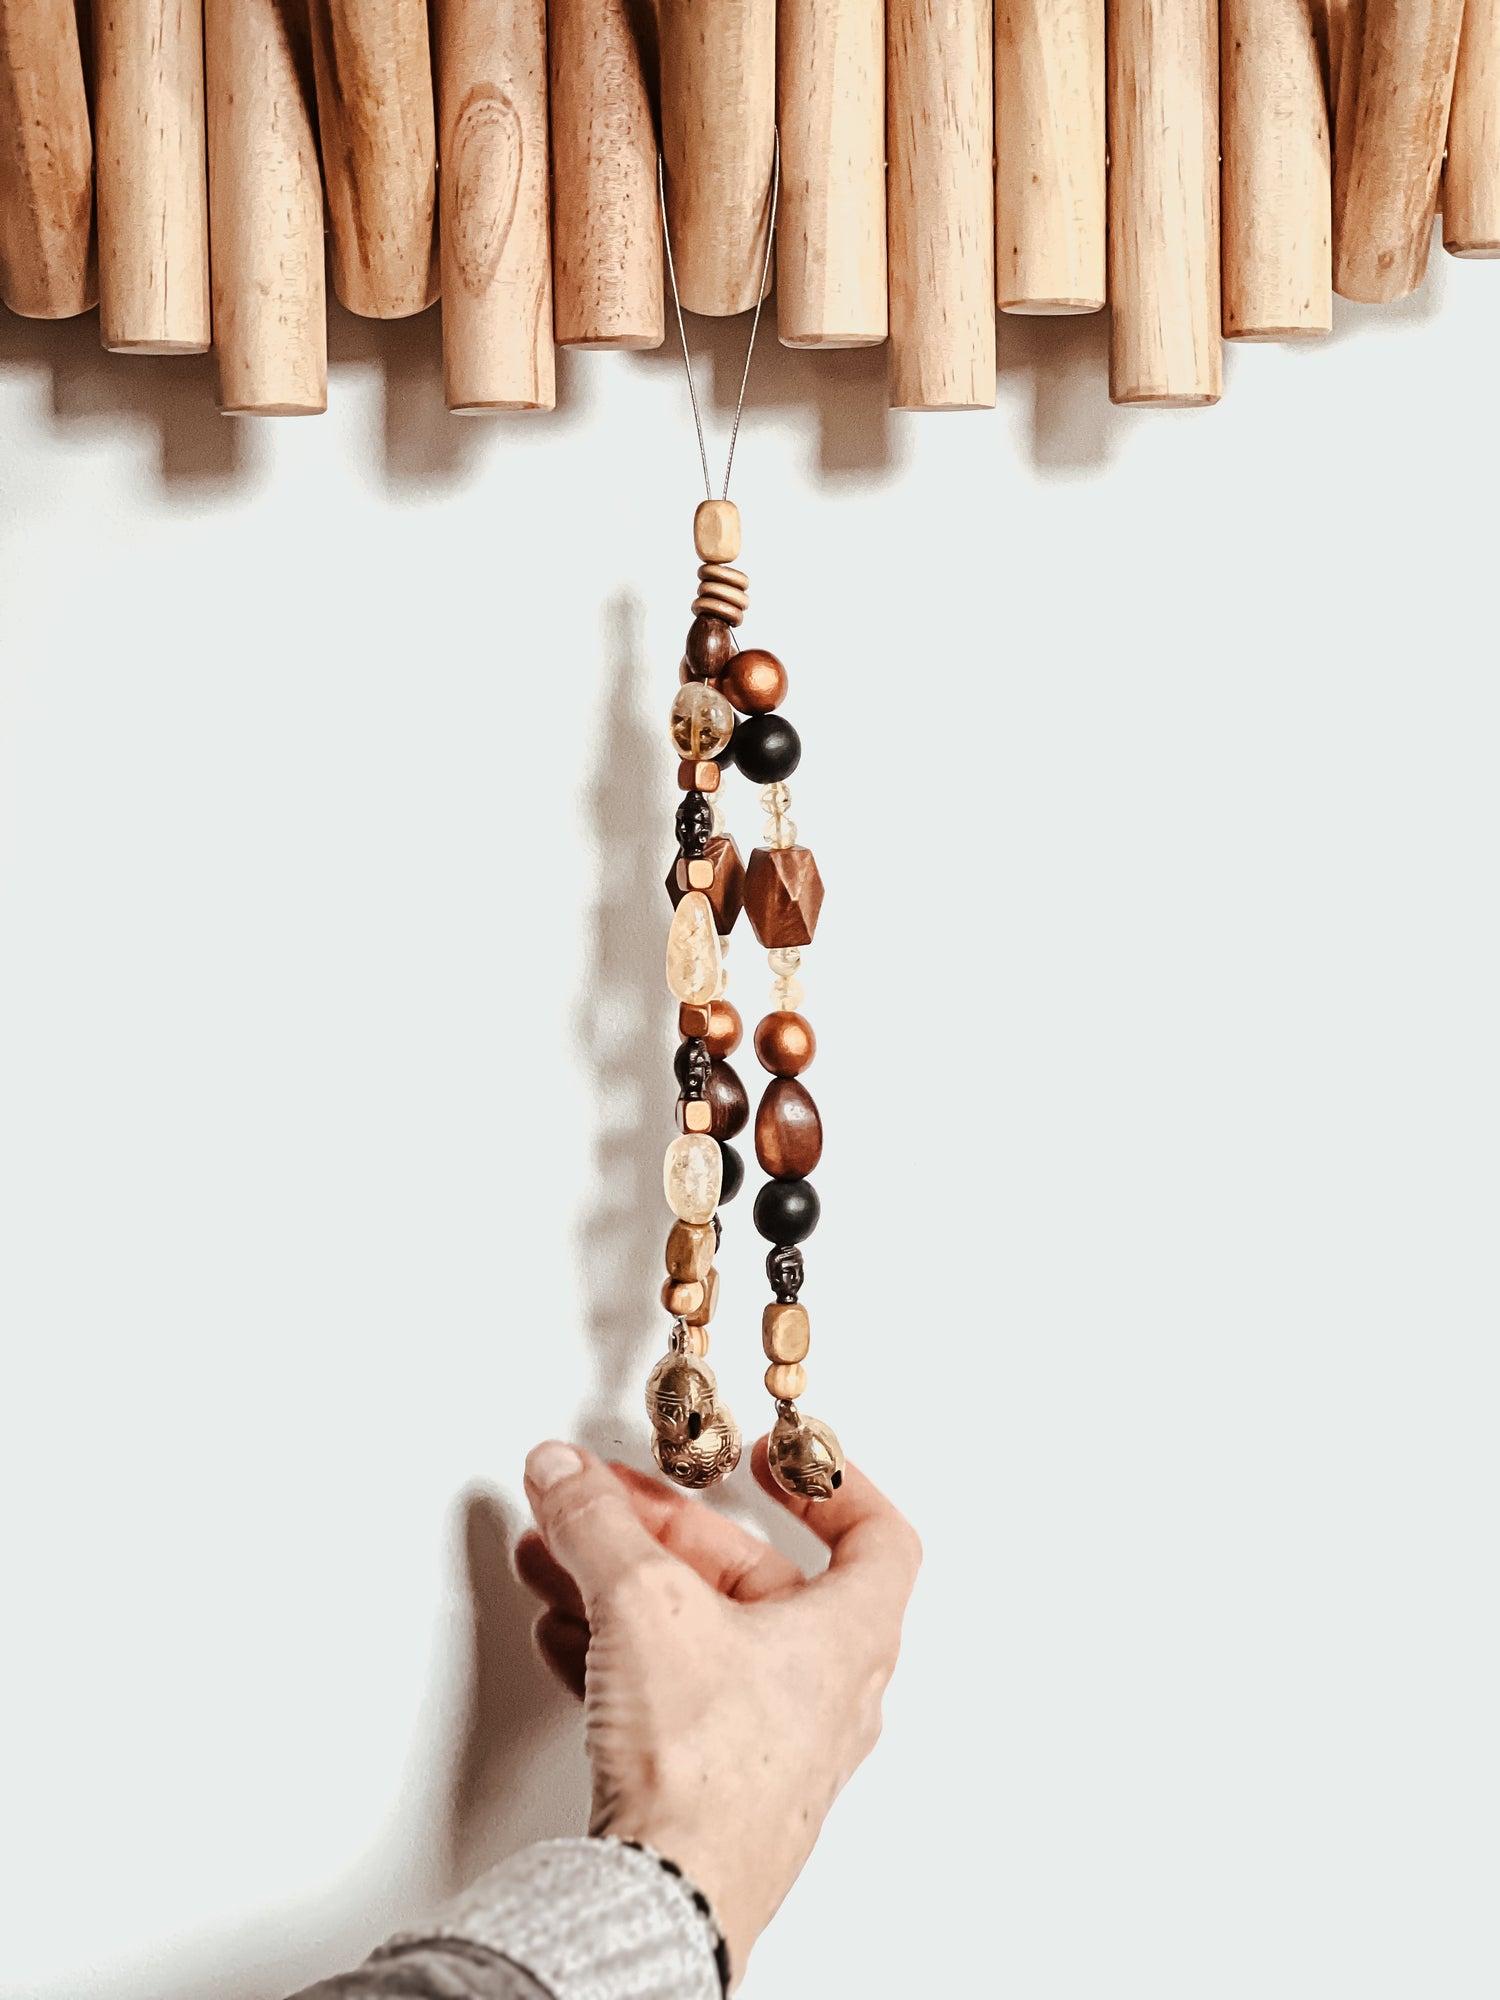 Photo of hand lightly ringing handcrafted bells attached to a triple strand of wooden beads, citrine crystals, and metal buddhas.